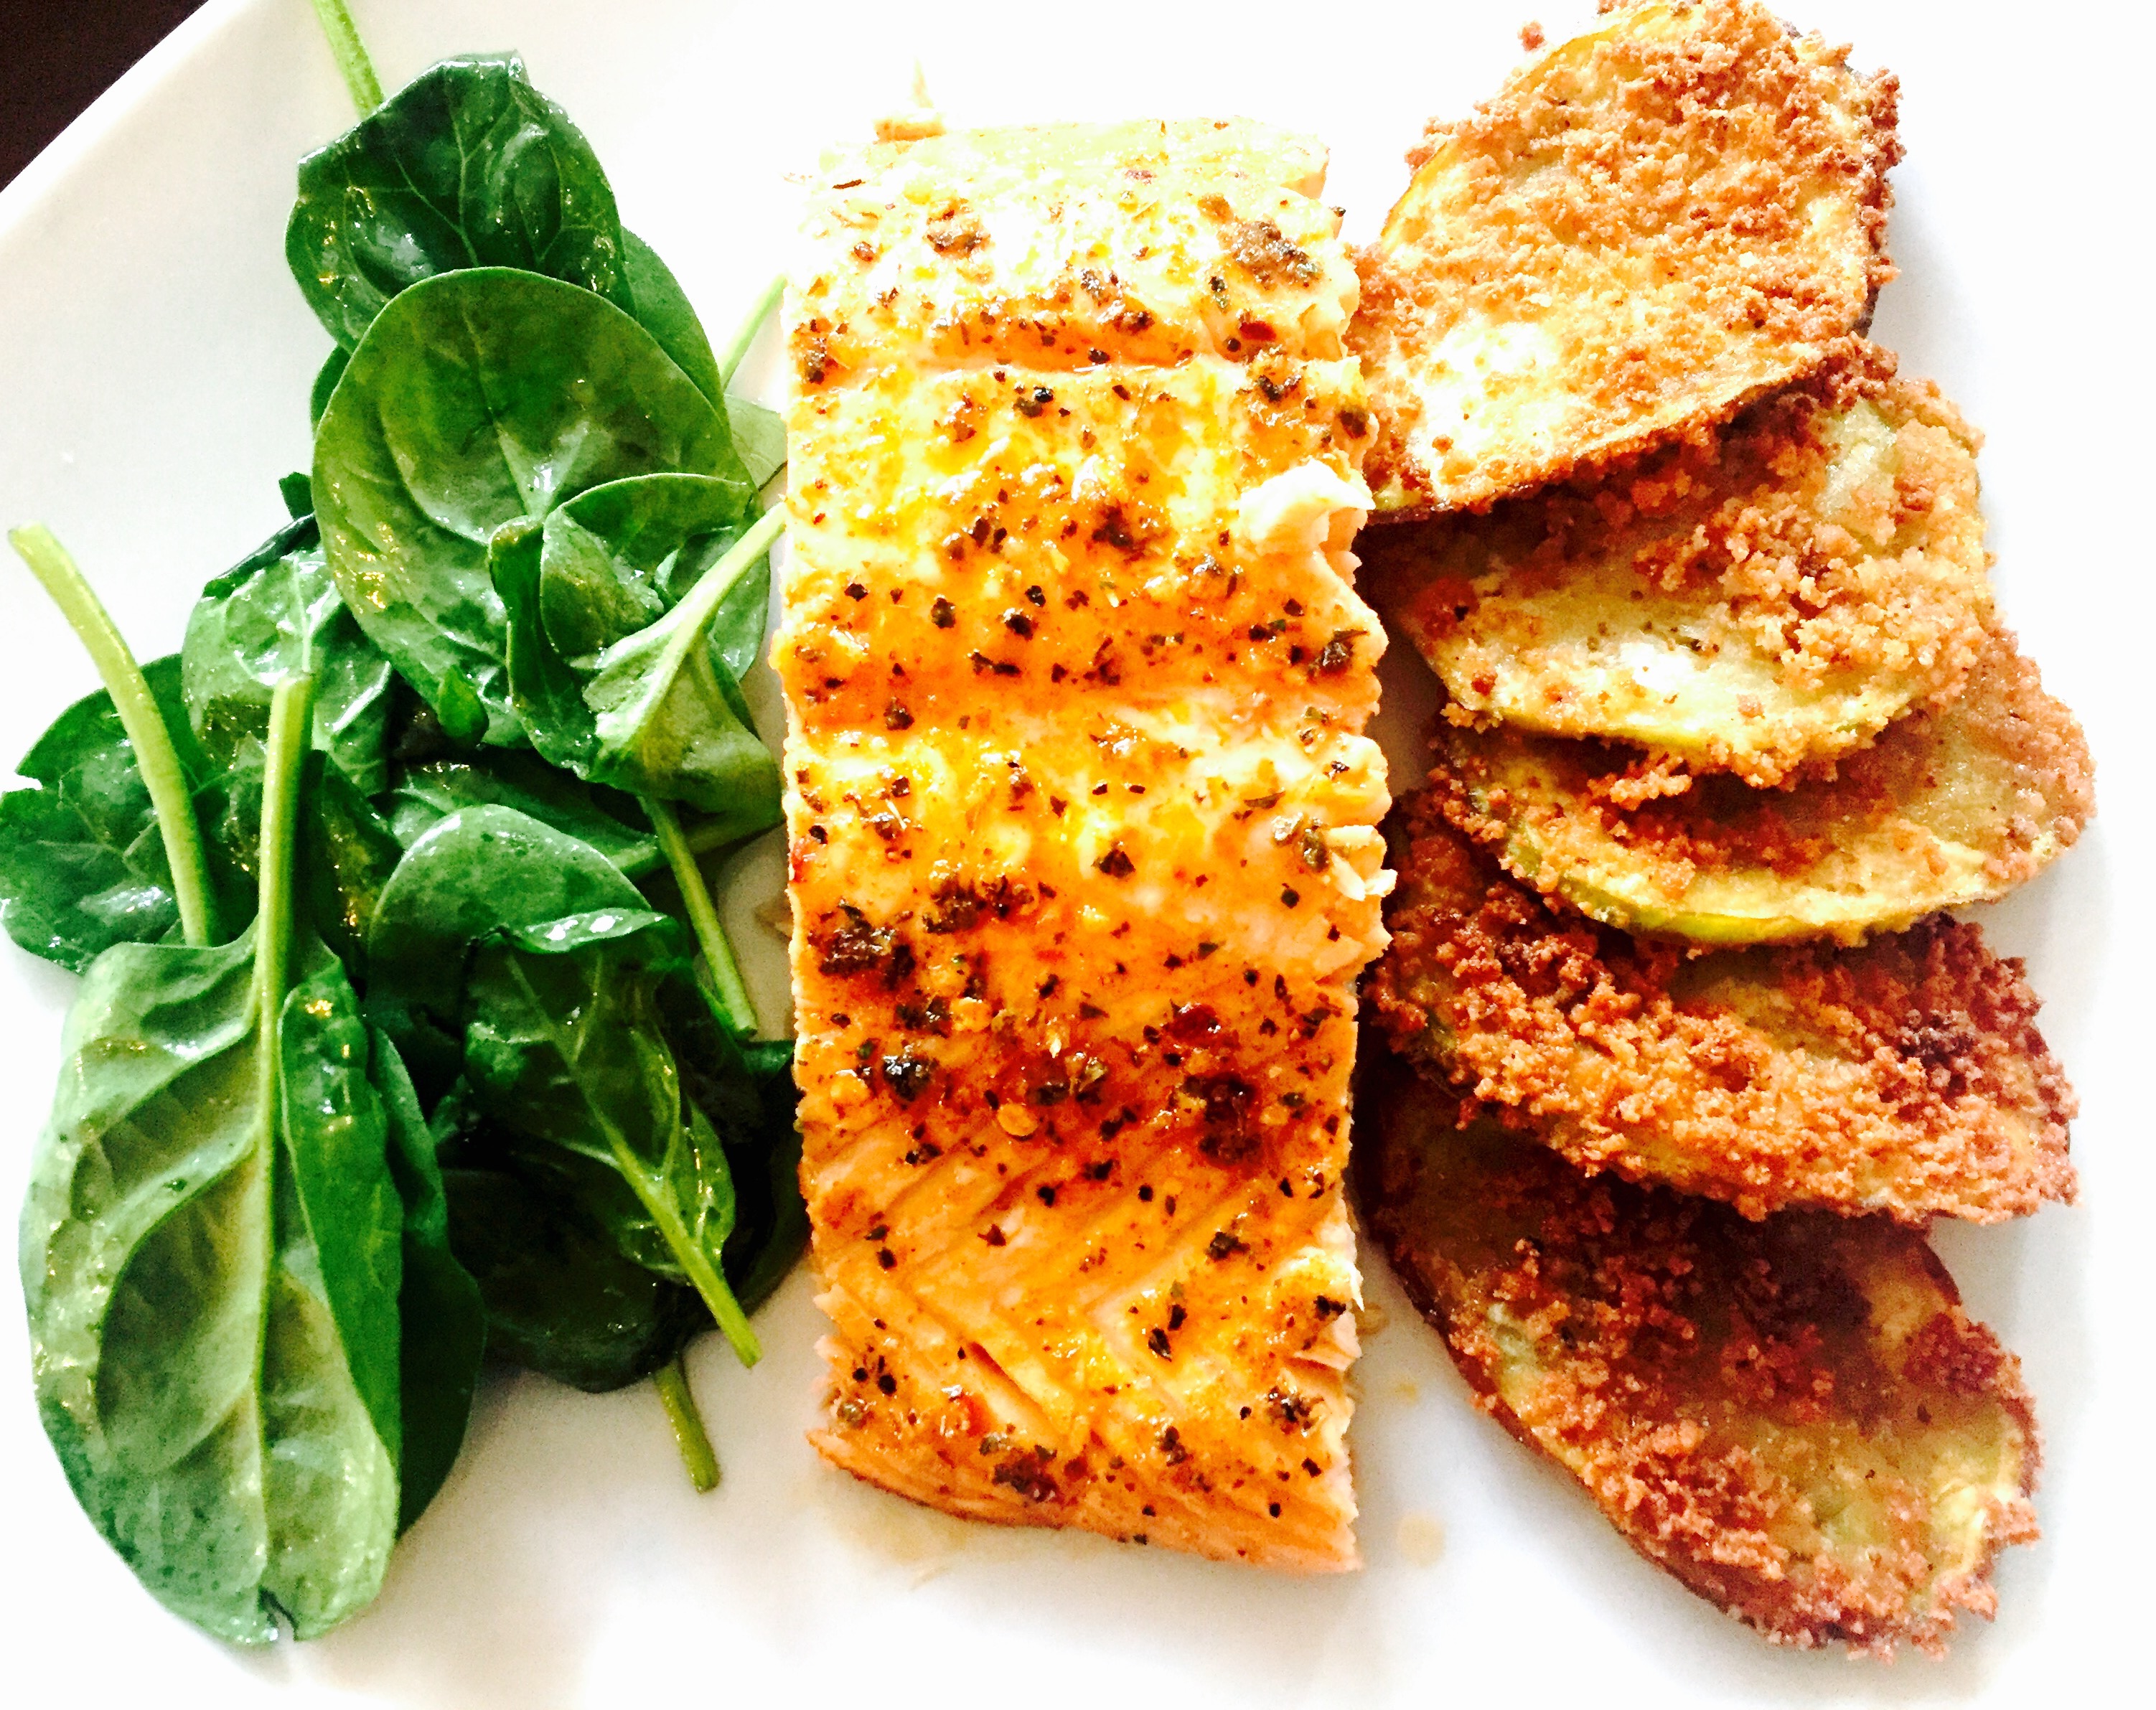 Baked salmon with breaded eggplant and spinach salad